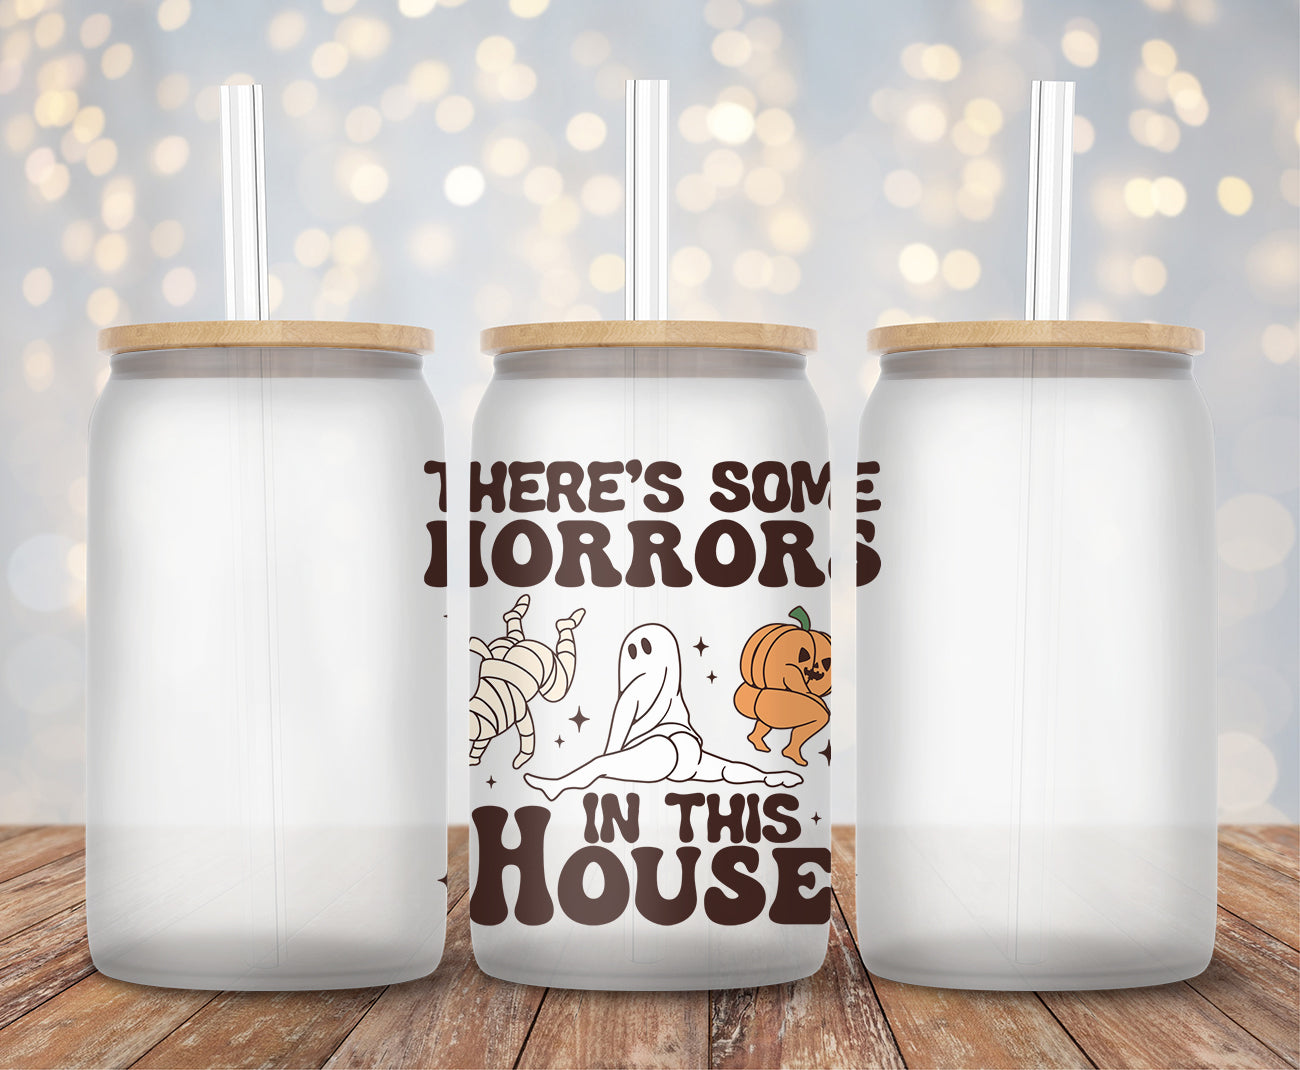 Theres some Horrors in this house - Decal